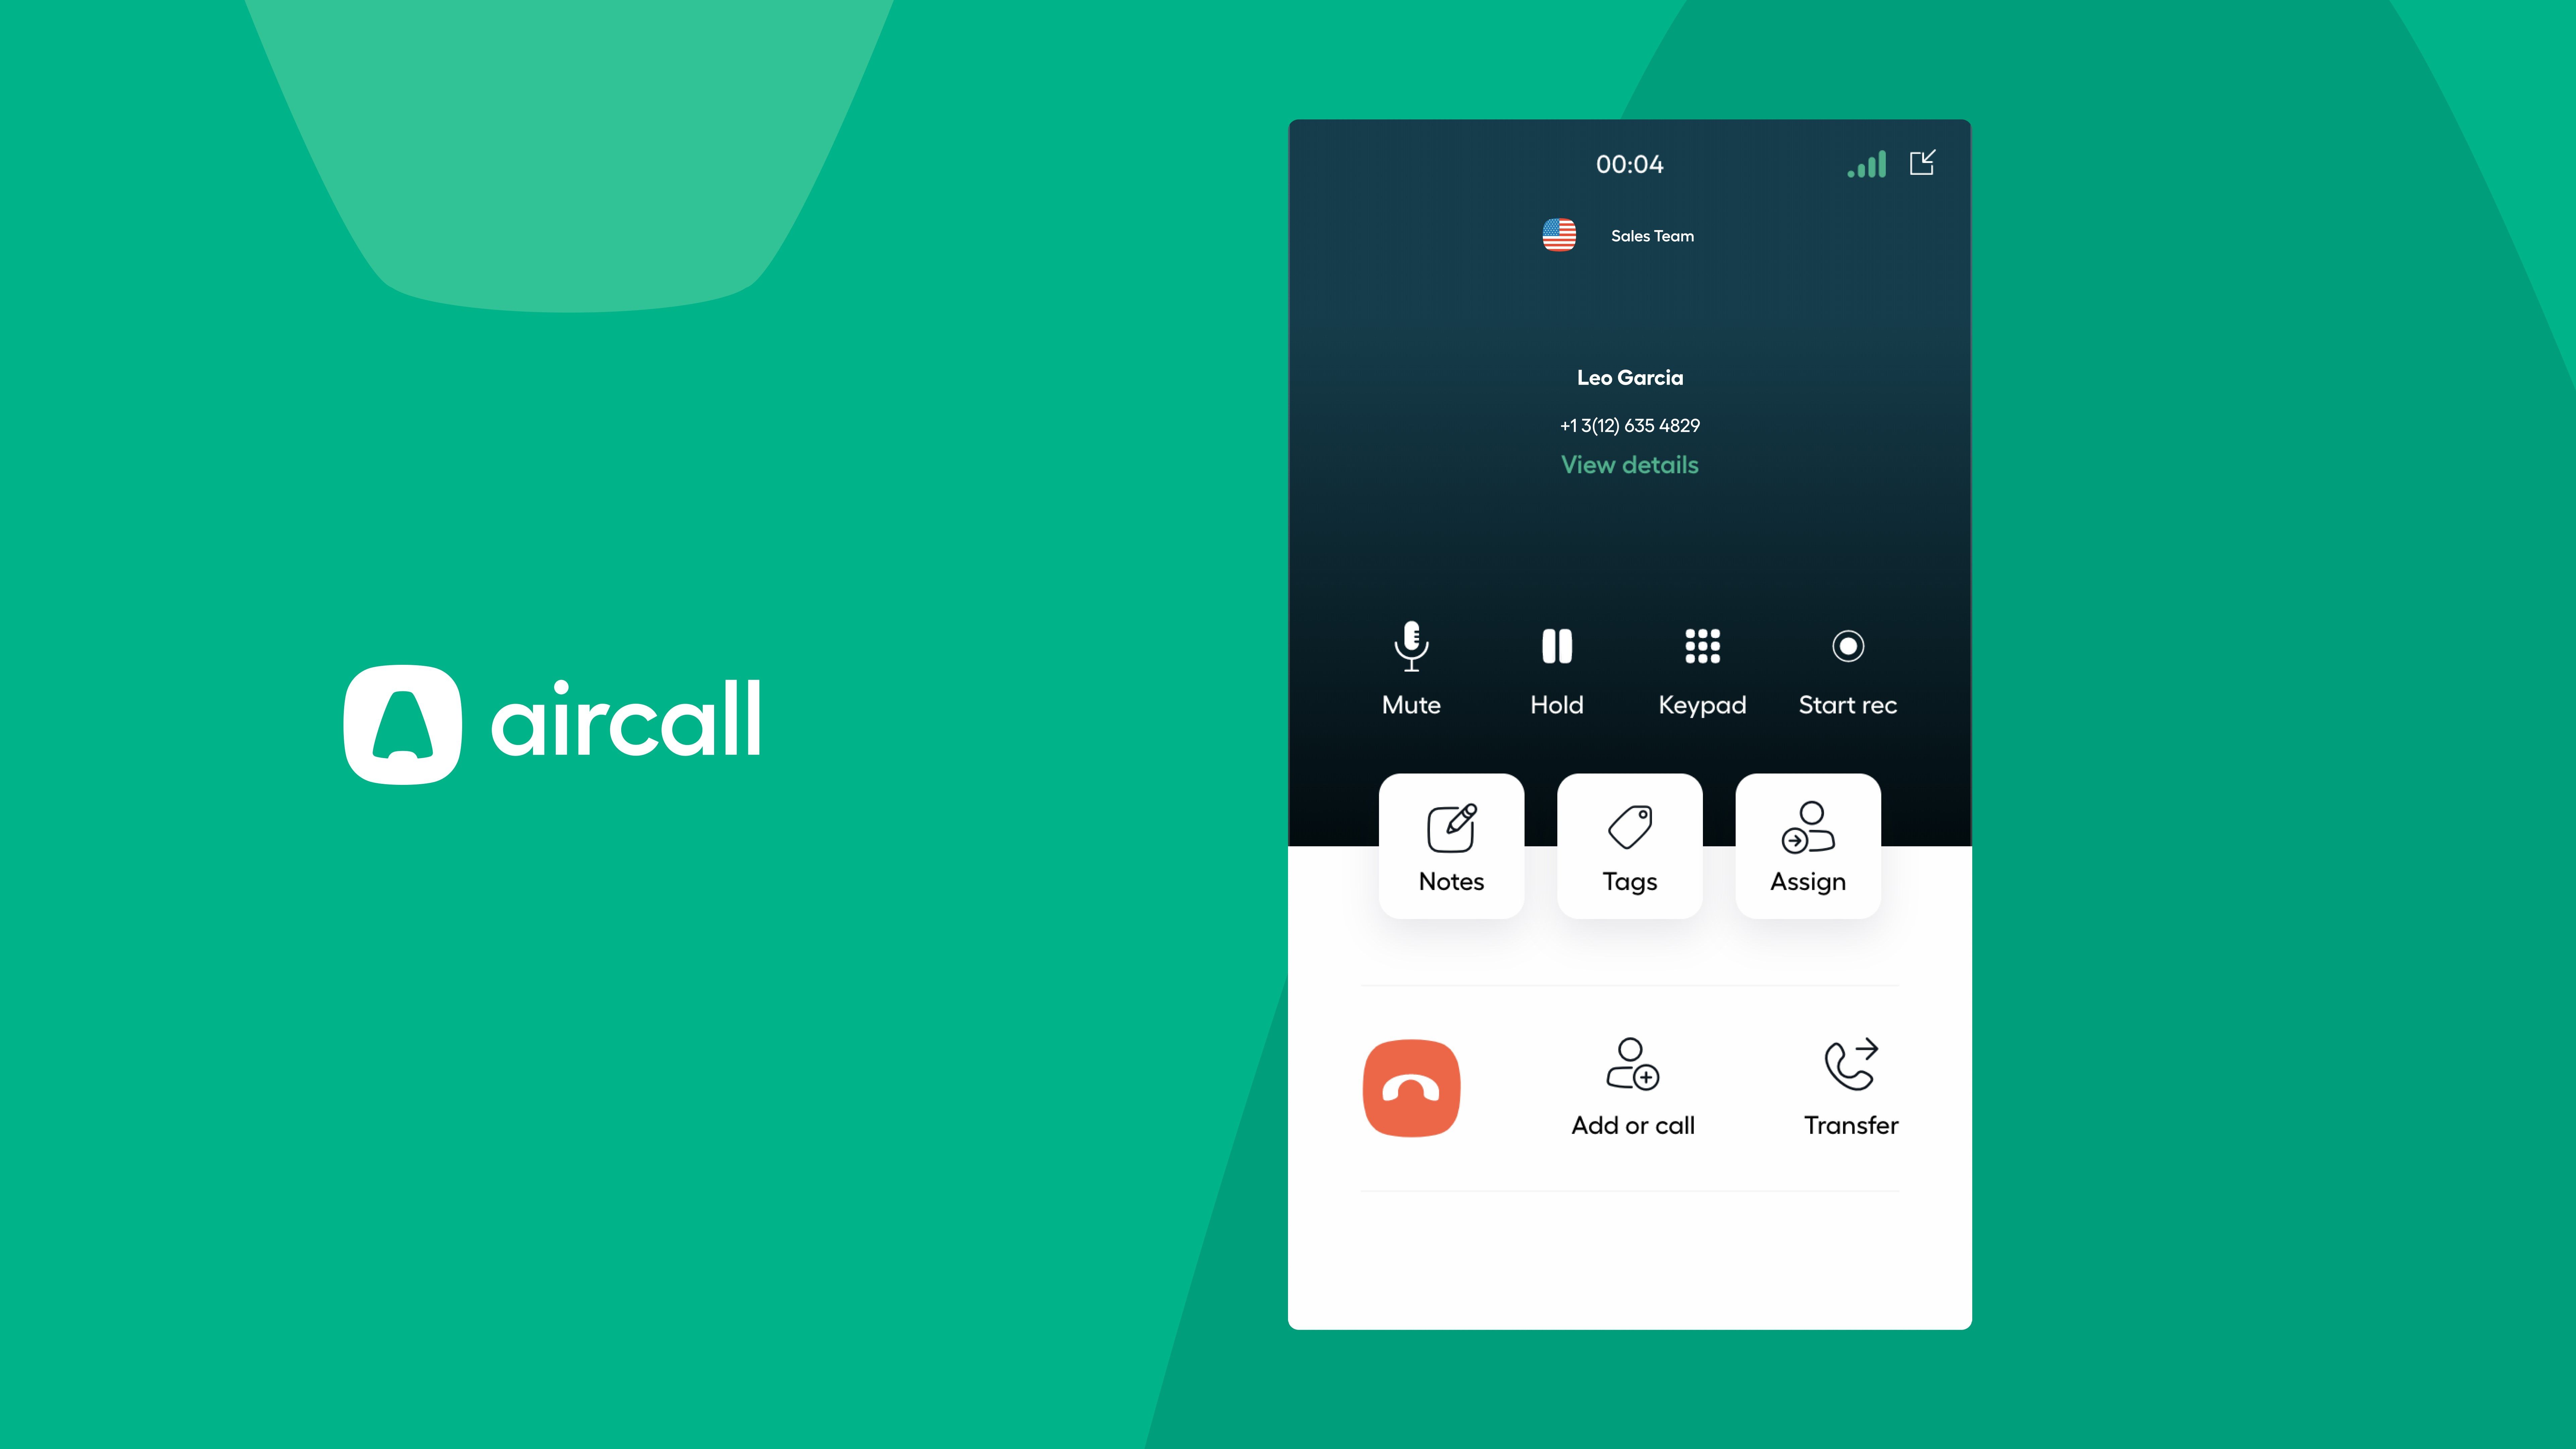 Tag and sync comments you make during calls